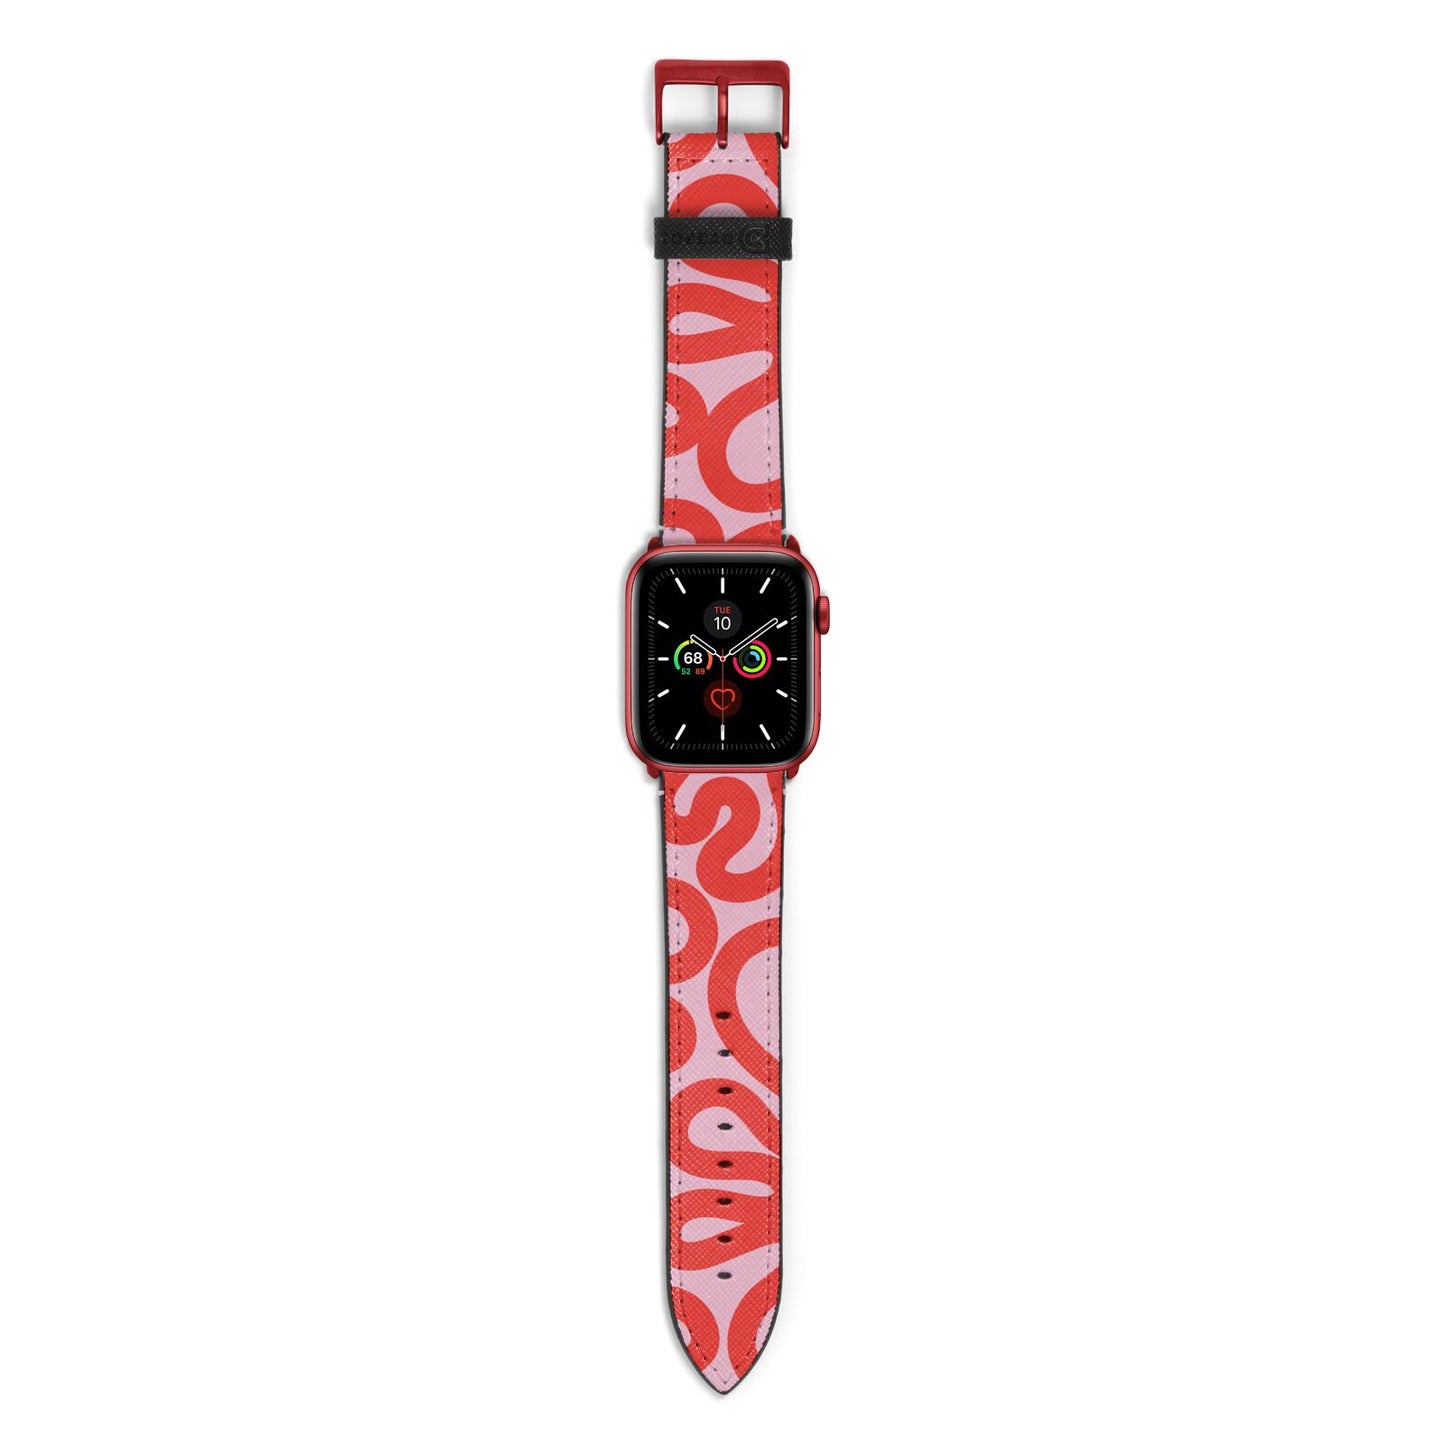 Squiggle Apple Watch Strap with Red Hardware